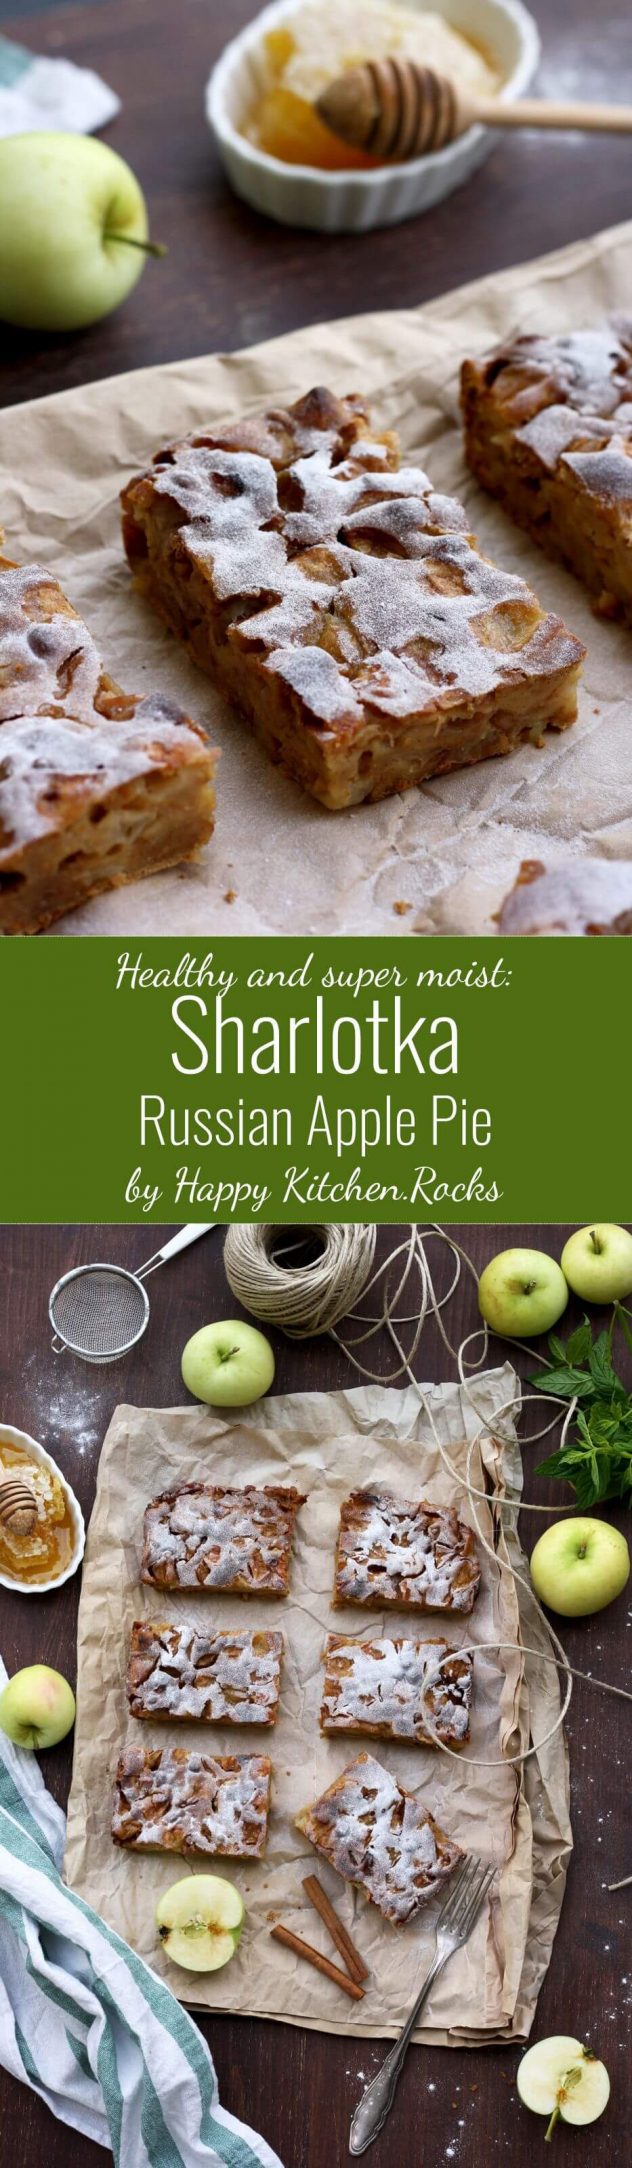 Sharlotka (Шарлотка) is the most well-known, quick and easy Russian apple pie. It's the most moist, healthy and delicious apple pie I've ever tasted! This recipe is sugar-free and dairy-free.